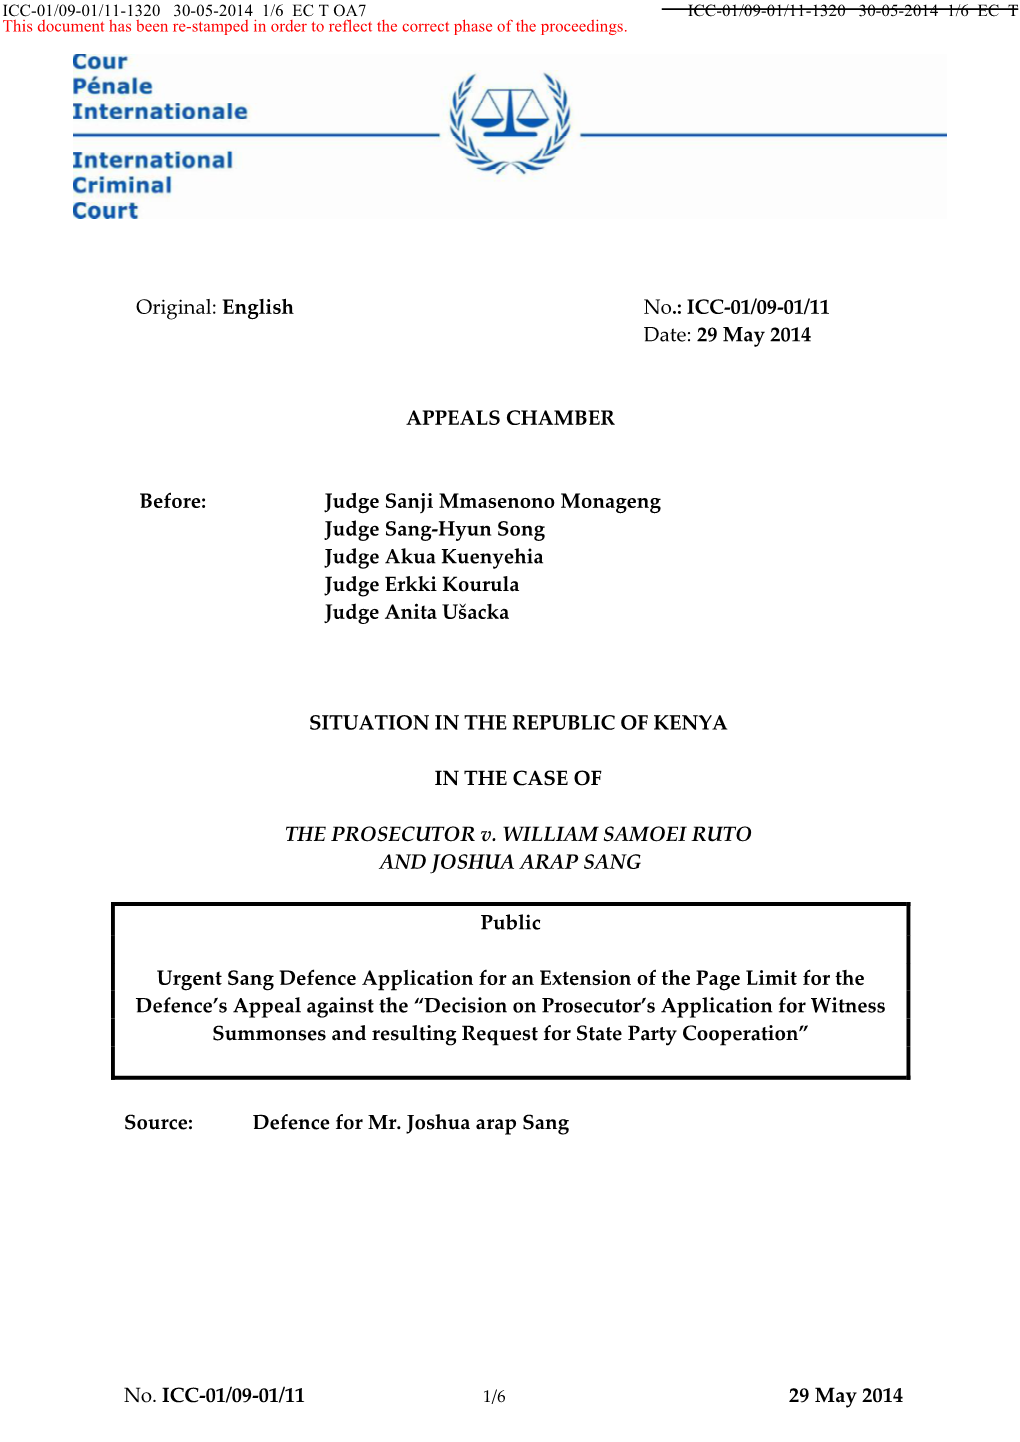 ICC-01/09-01/11 Date: 29 May 2014 APPEALS CHAMBER Before